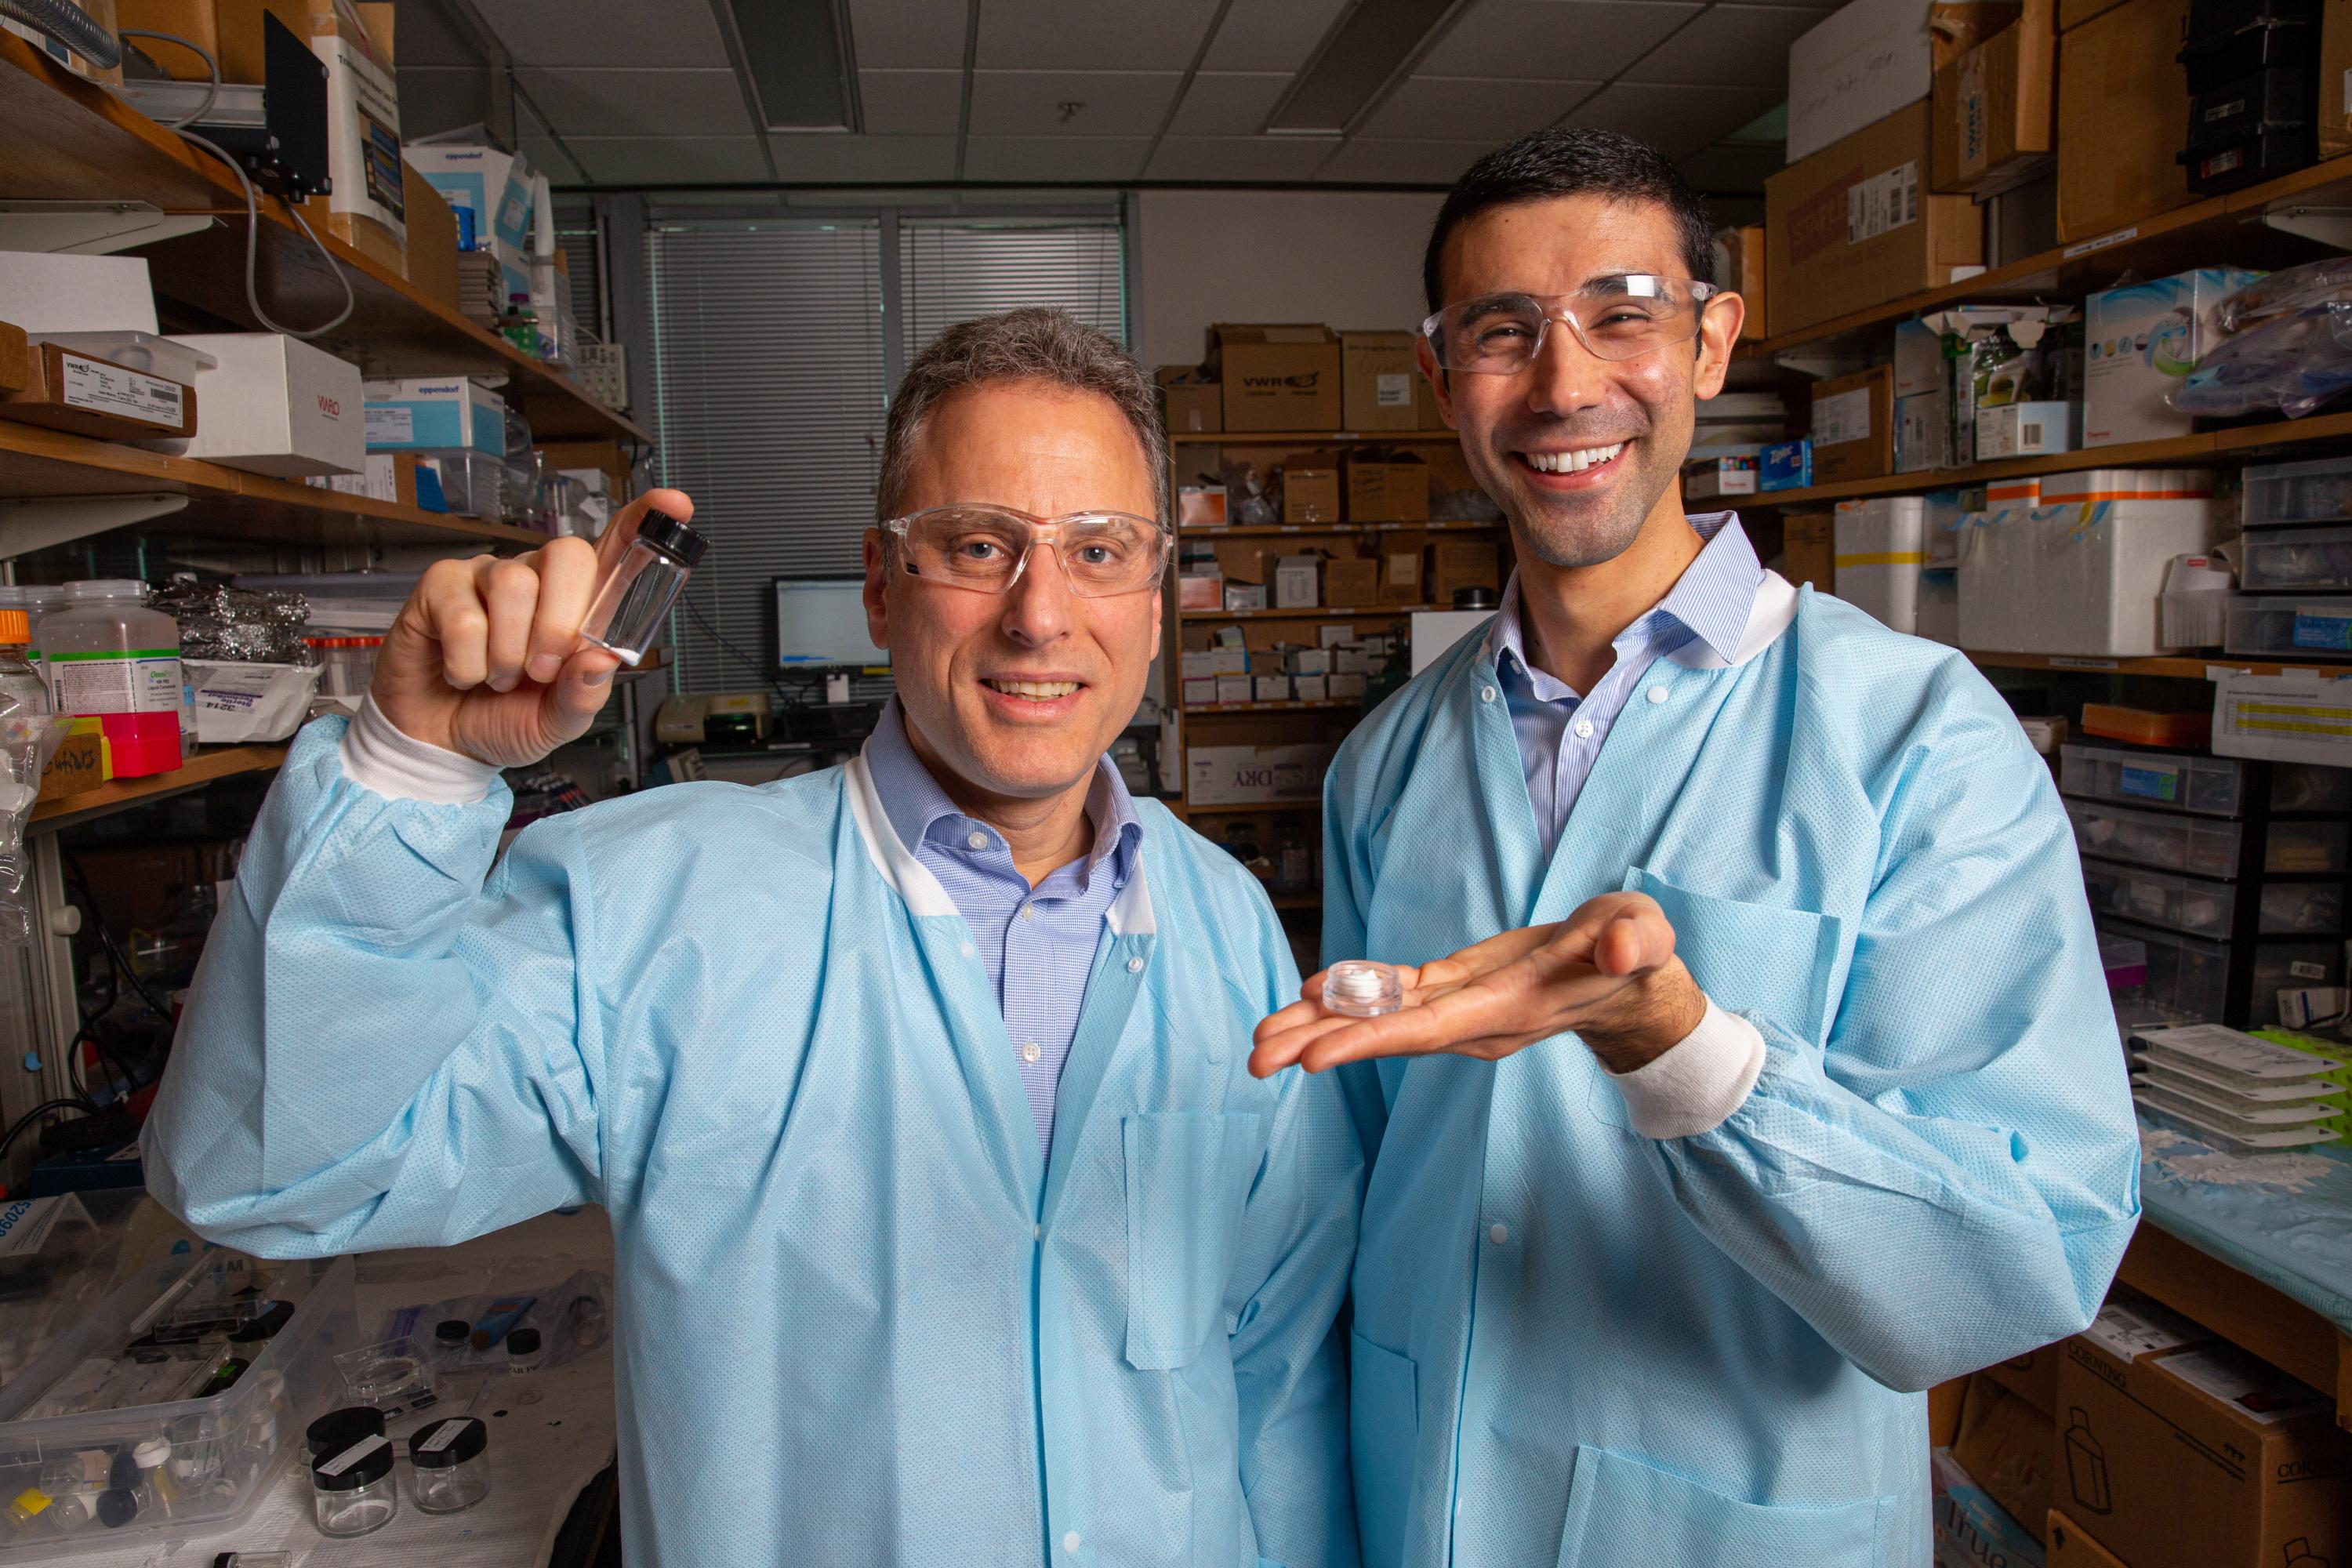 Georgia Tech Professor Mark Prausnitz and Postdoctoral Scholar Andrew Tadros hold samples of the STAR particles, which could potentially facilitate better treatment of skin diseases including psoriasis, warts, and certain types of skin cancer. (Credit: Candler Hobbs, Georgia Tech)